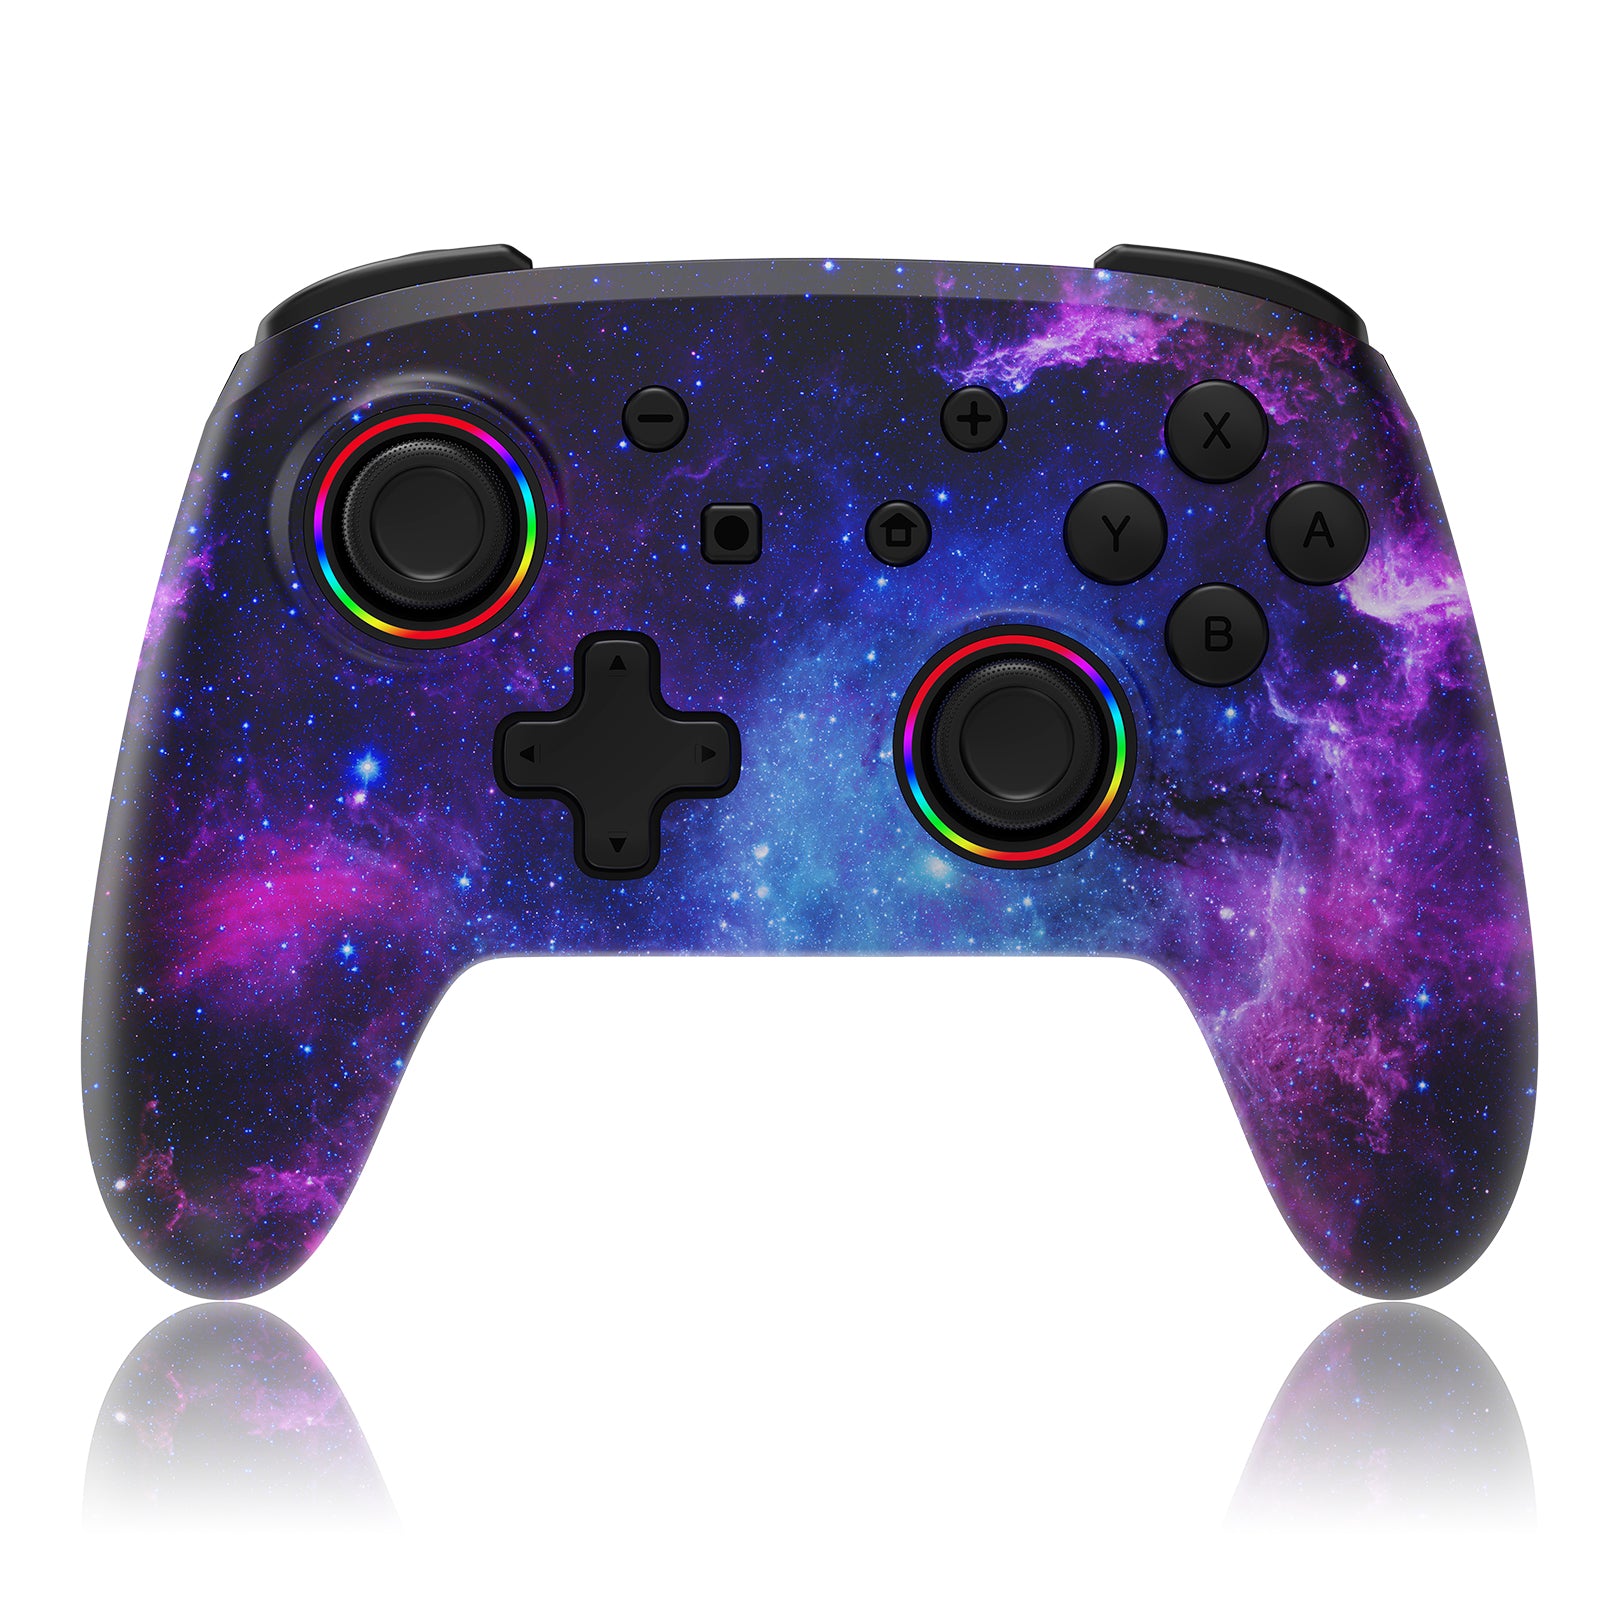 The image showcases a cool cosmic nebula skin on the Bluetooth controller.